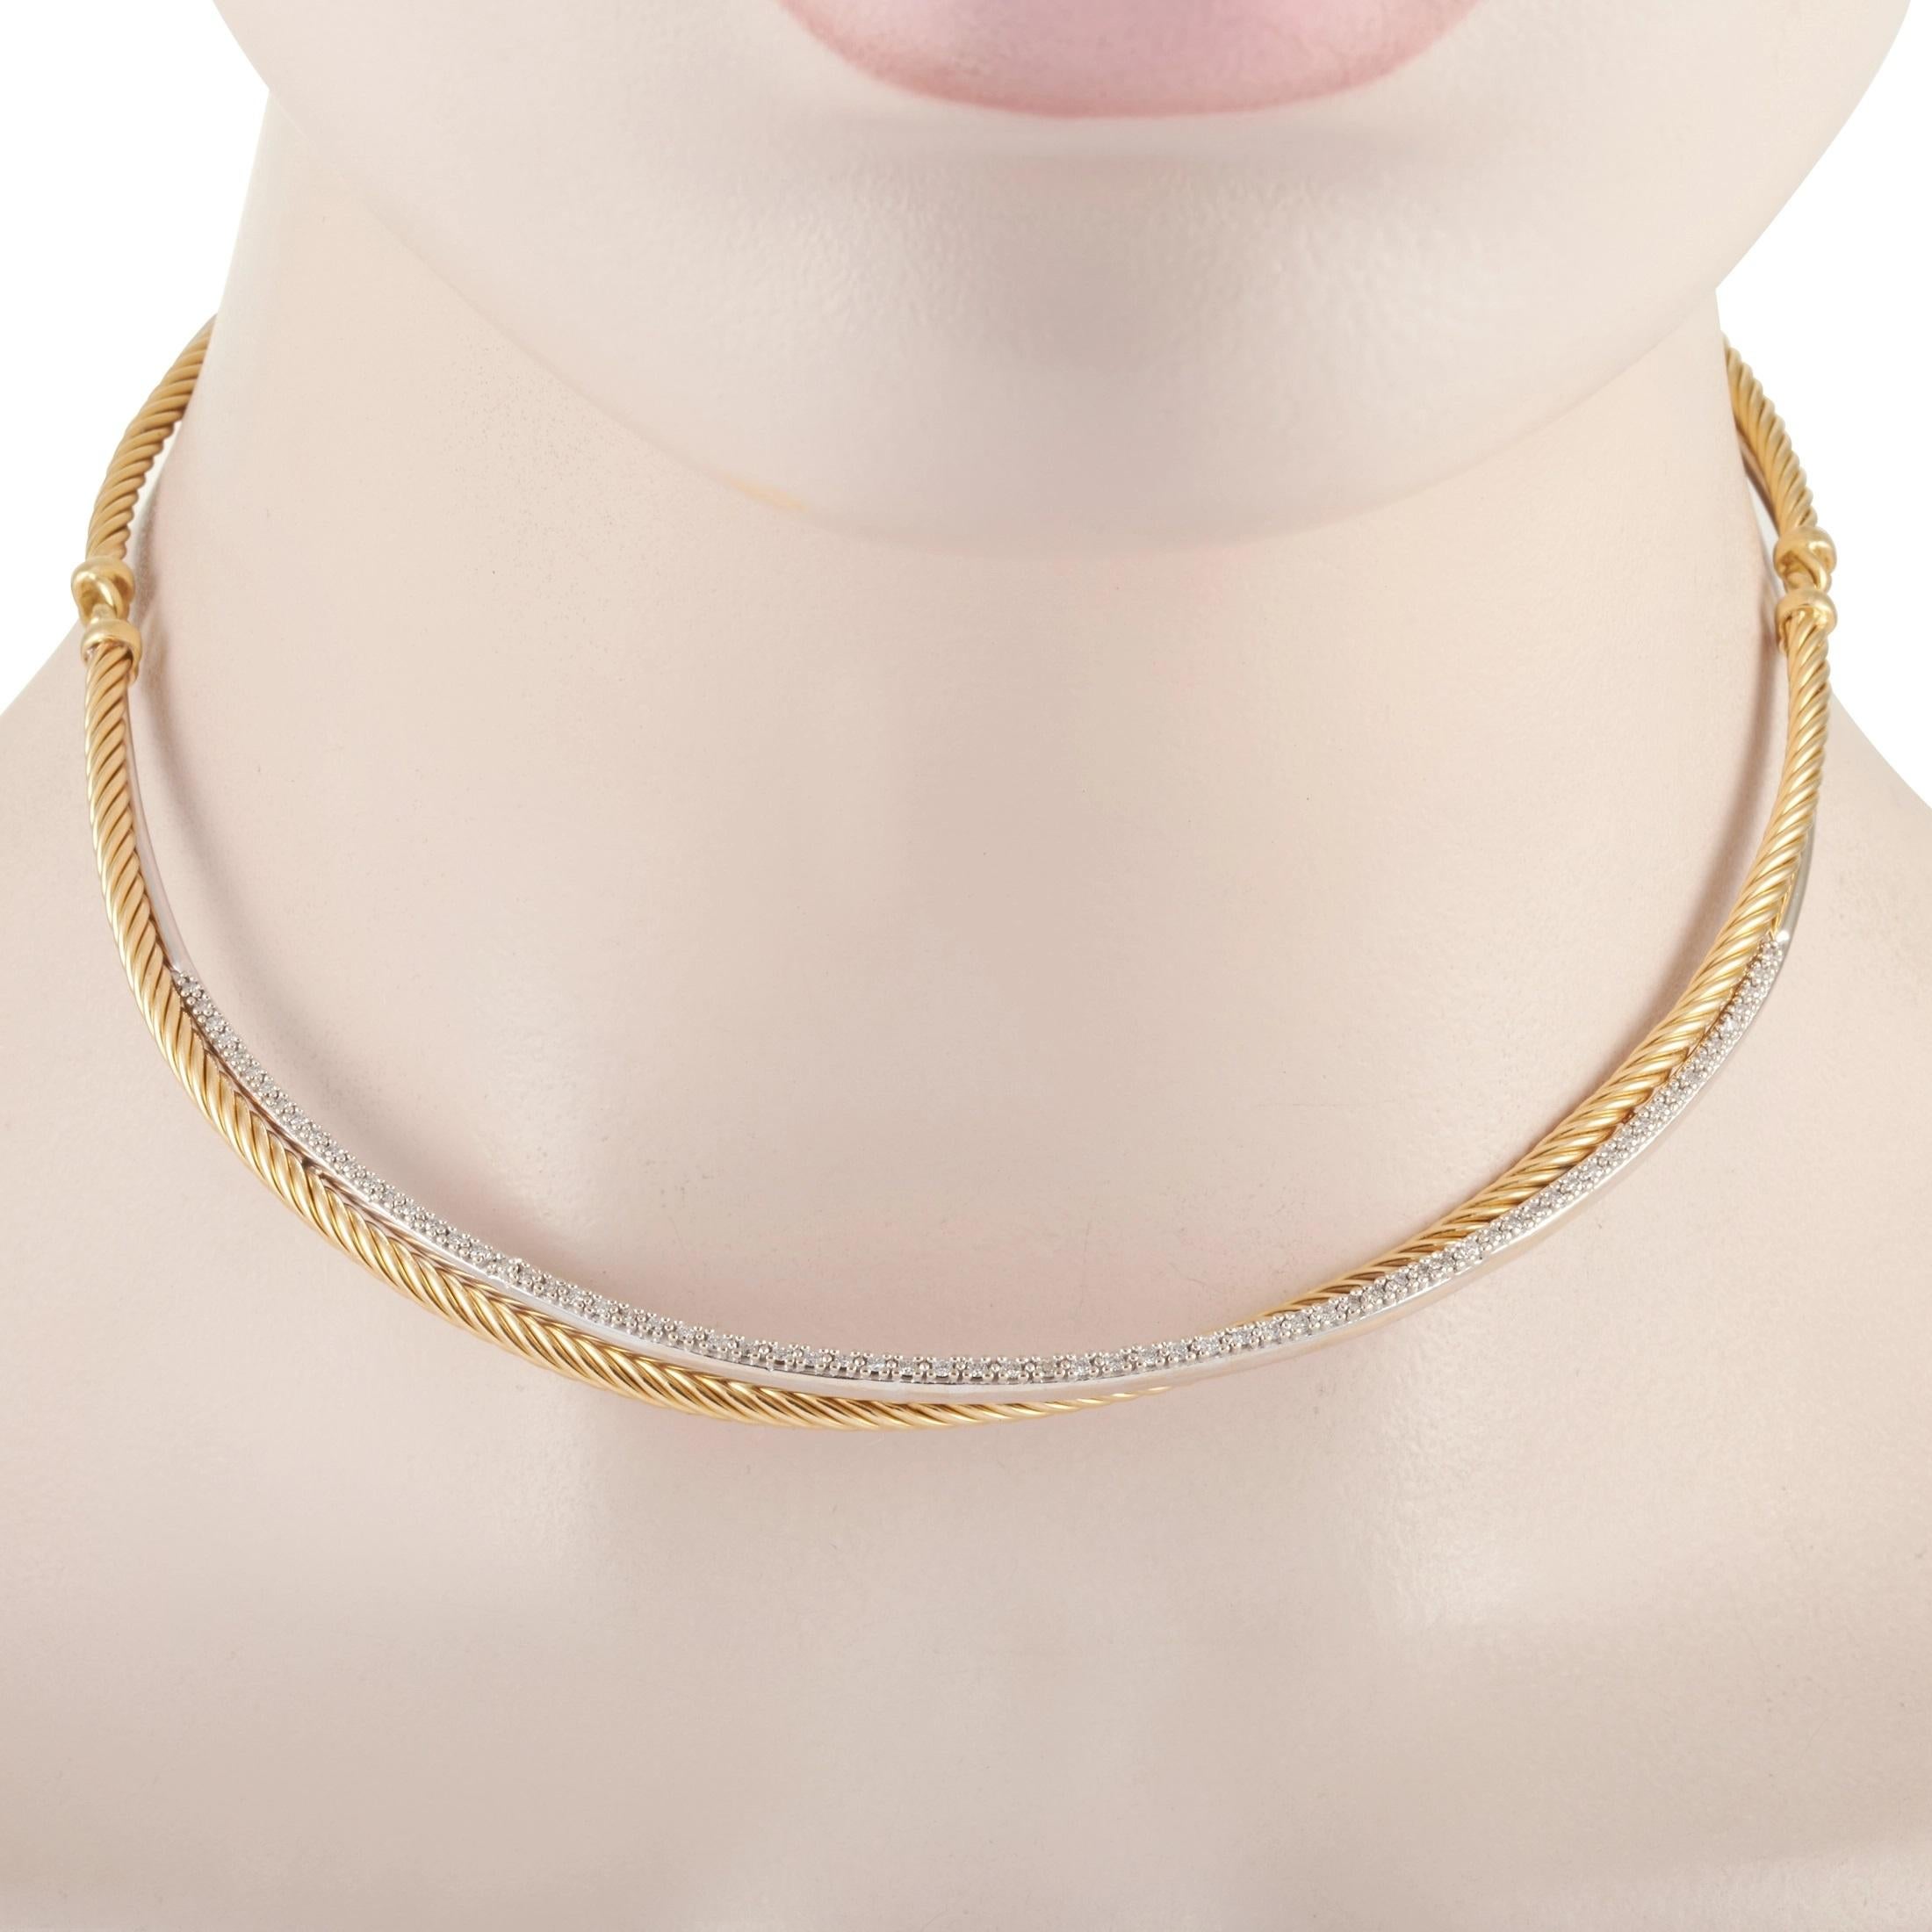 The David Yurman “Crossover” necklace features motifs from the “Crossover” and “Cable” collections, interlocking and intertwining to symbolize unity and integration. The necklace is made out of 18K yellow and white gold and weighs 49 grams,